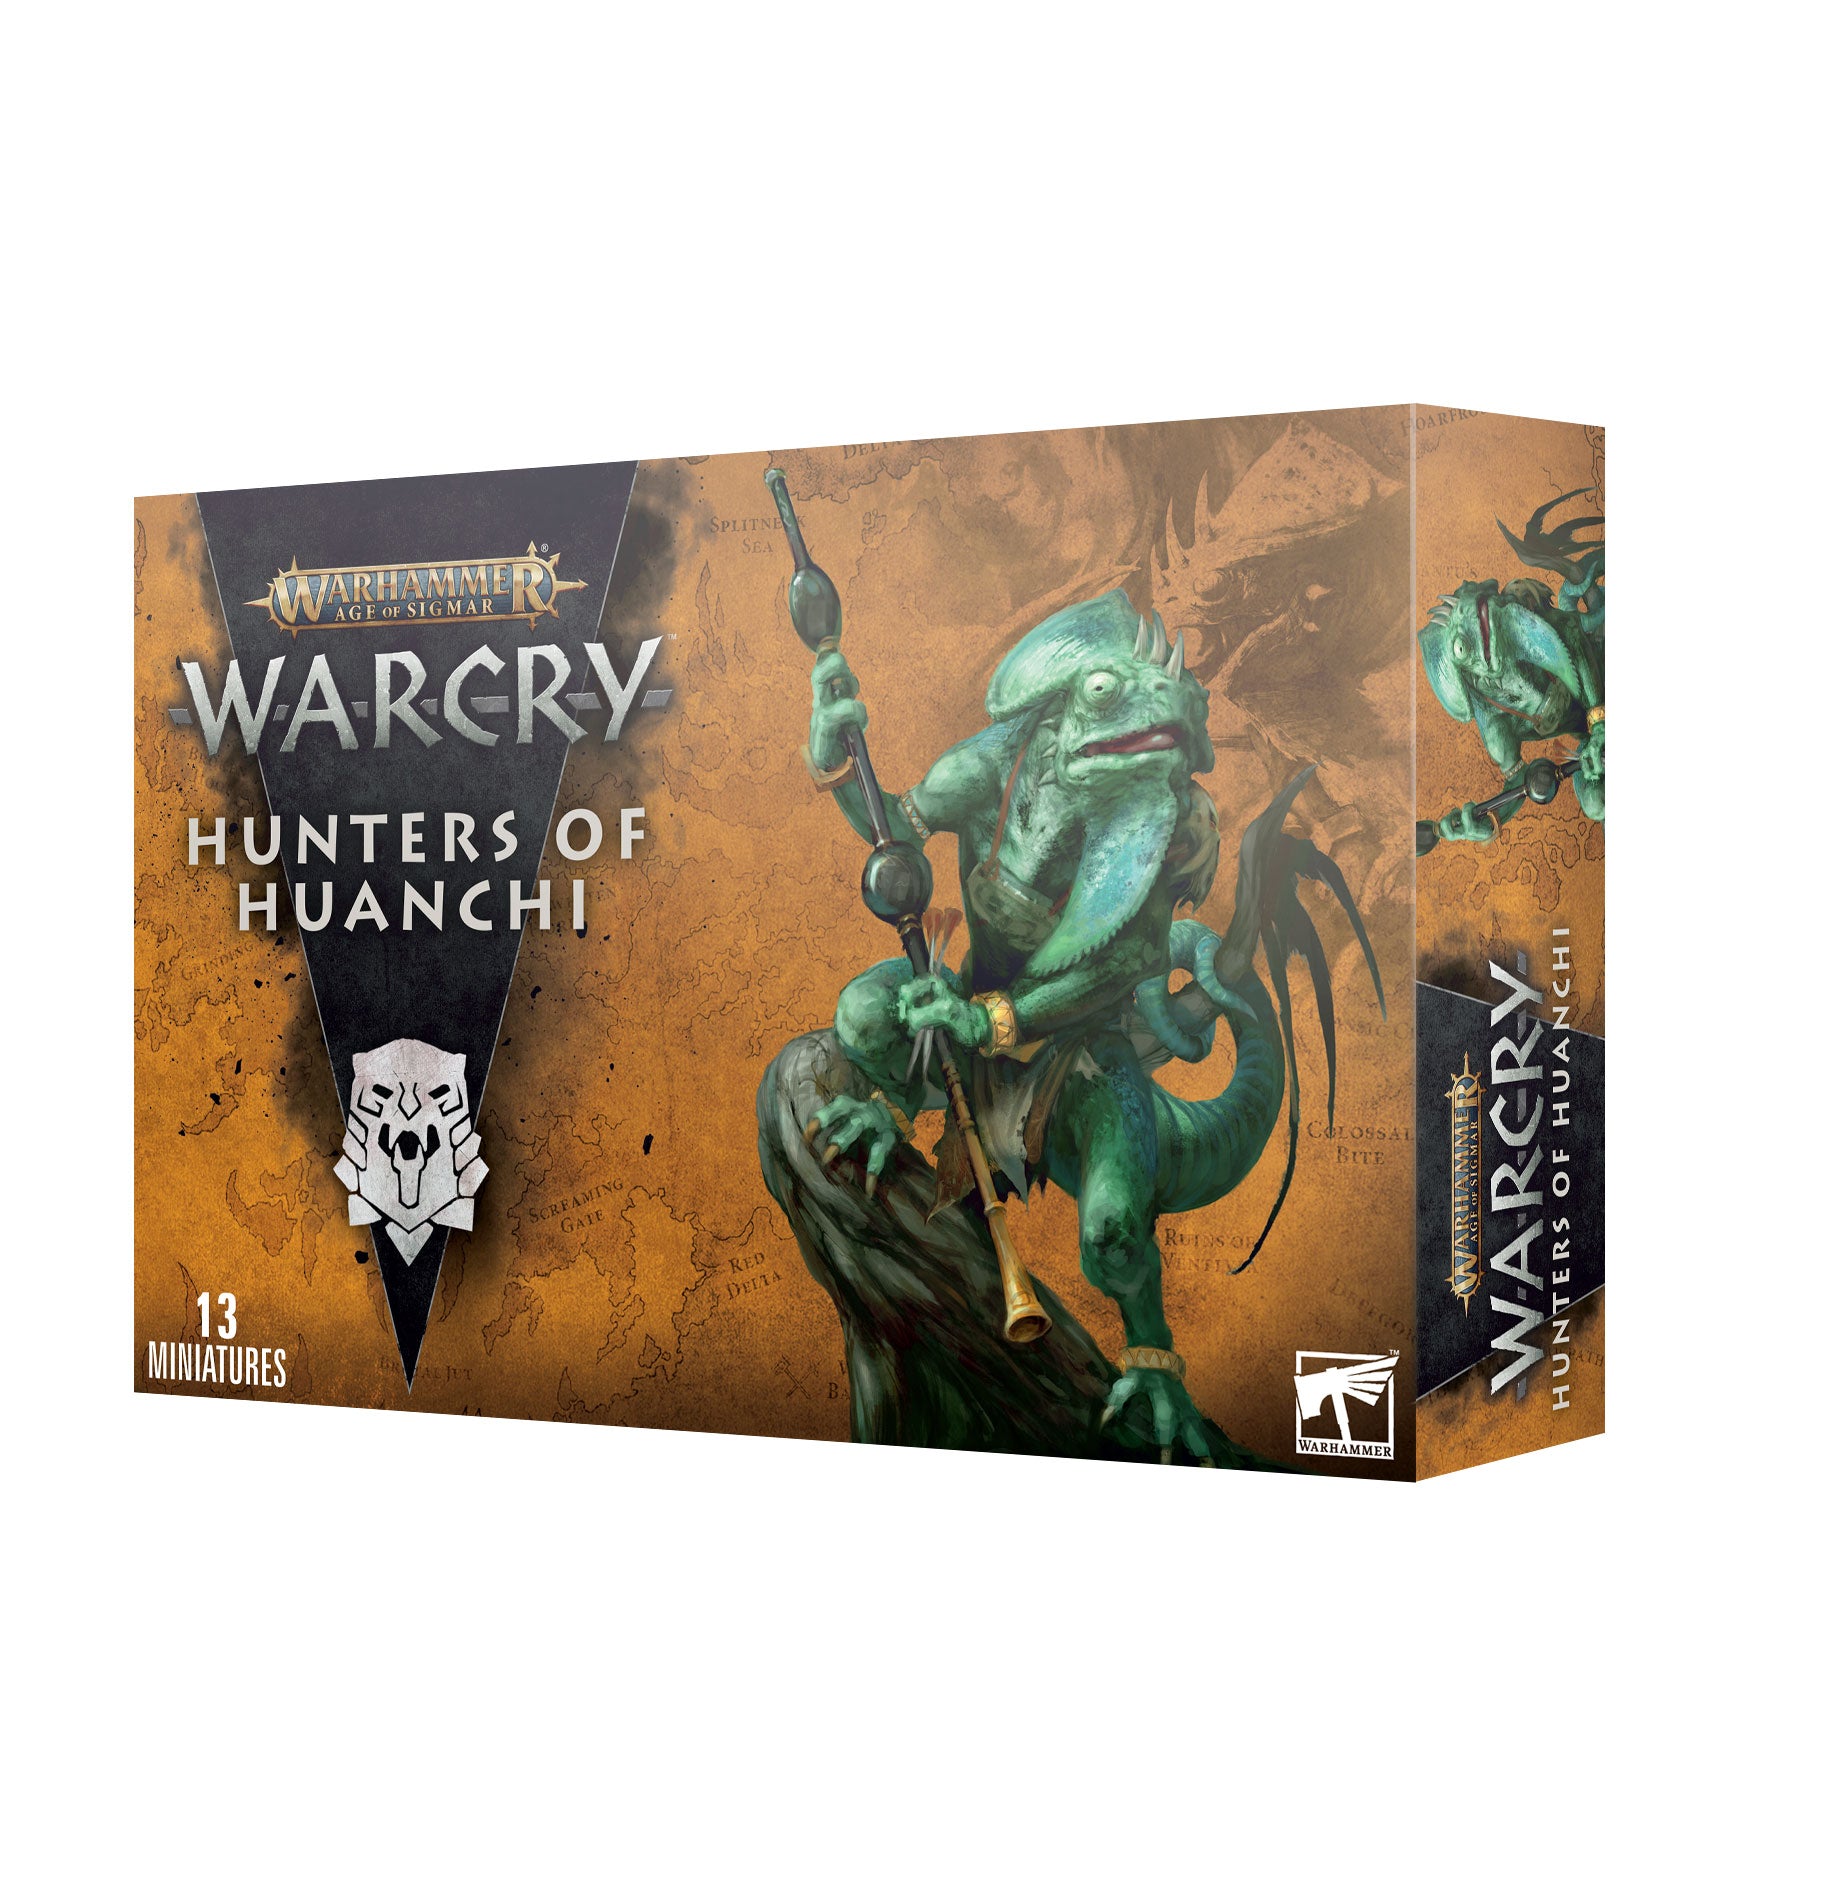 Warhammer Warcry: Hunters of Huanchi